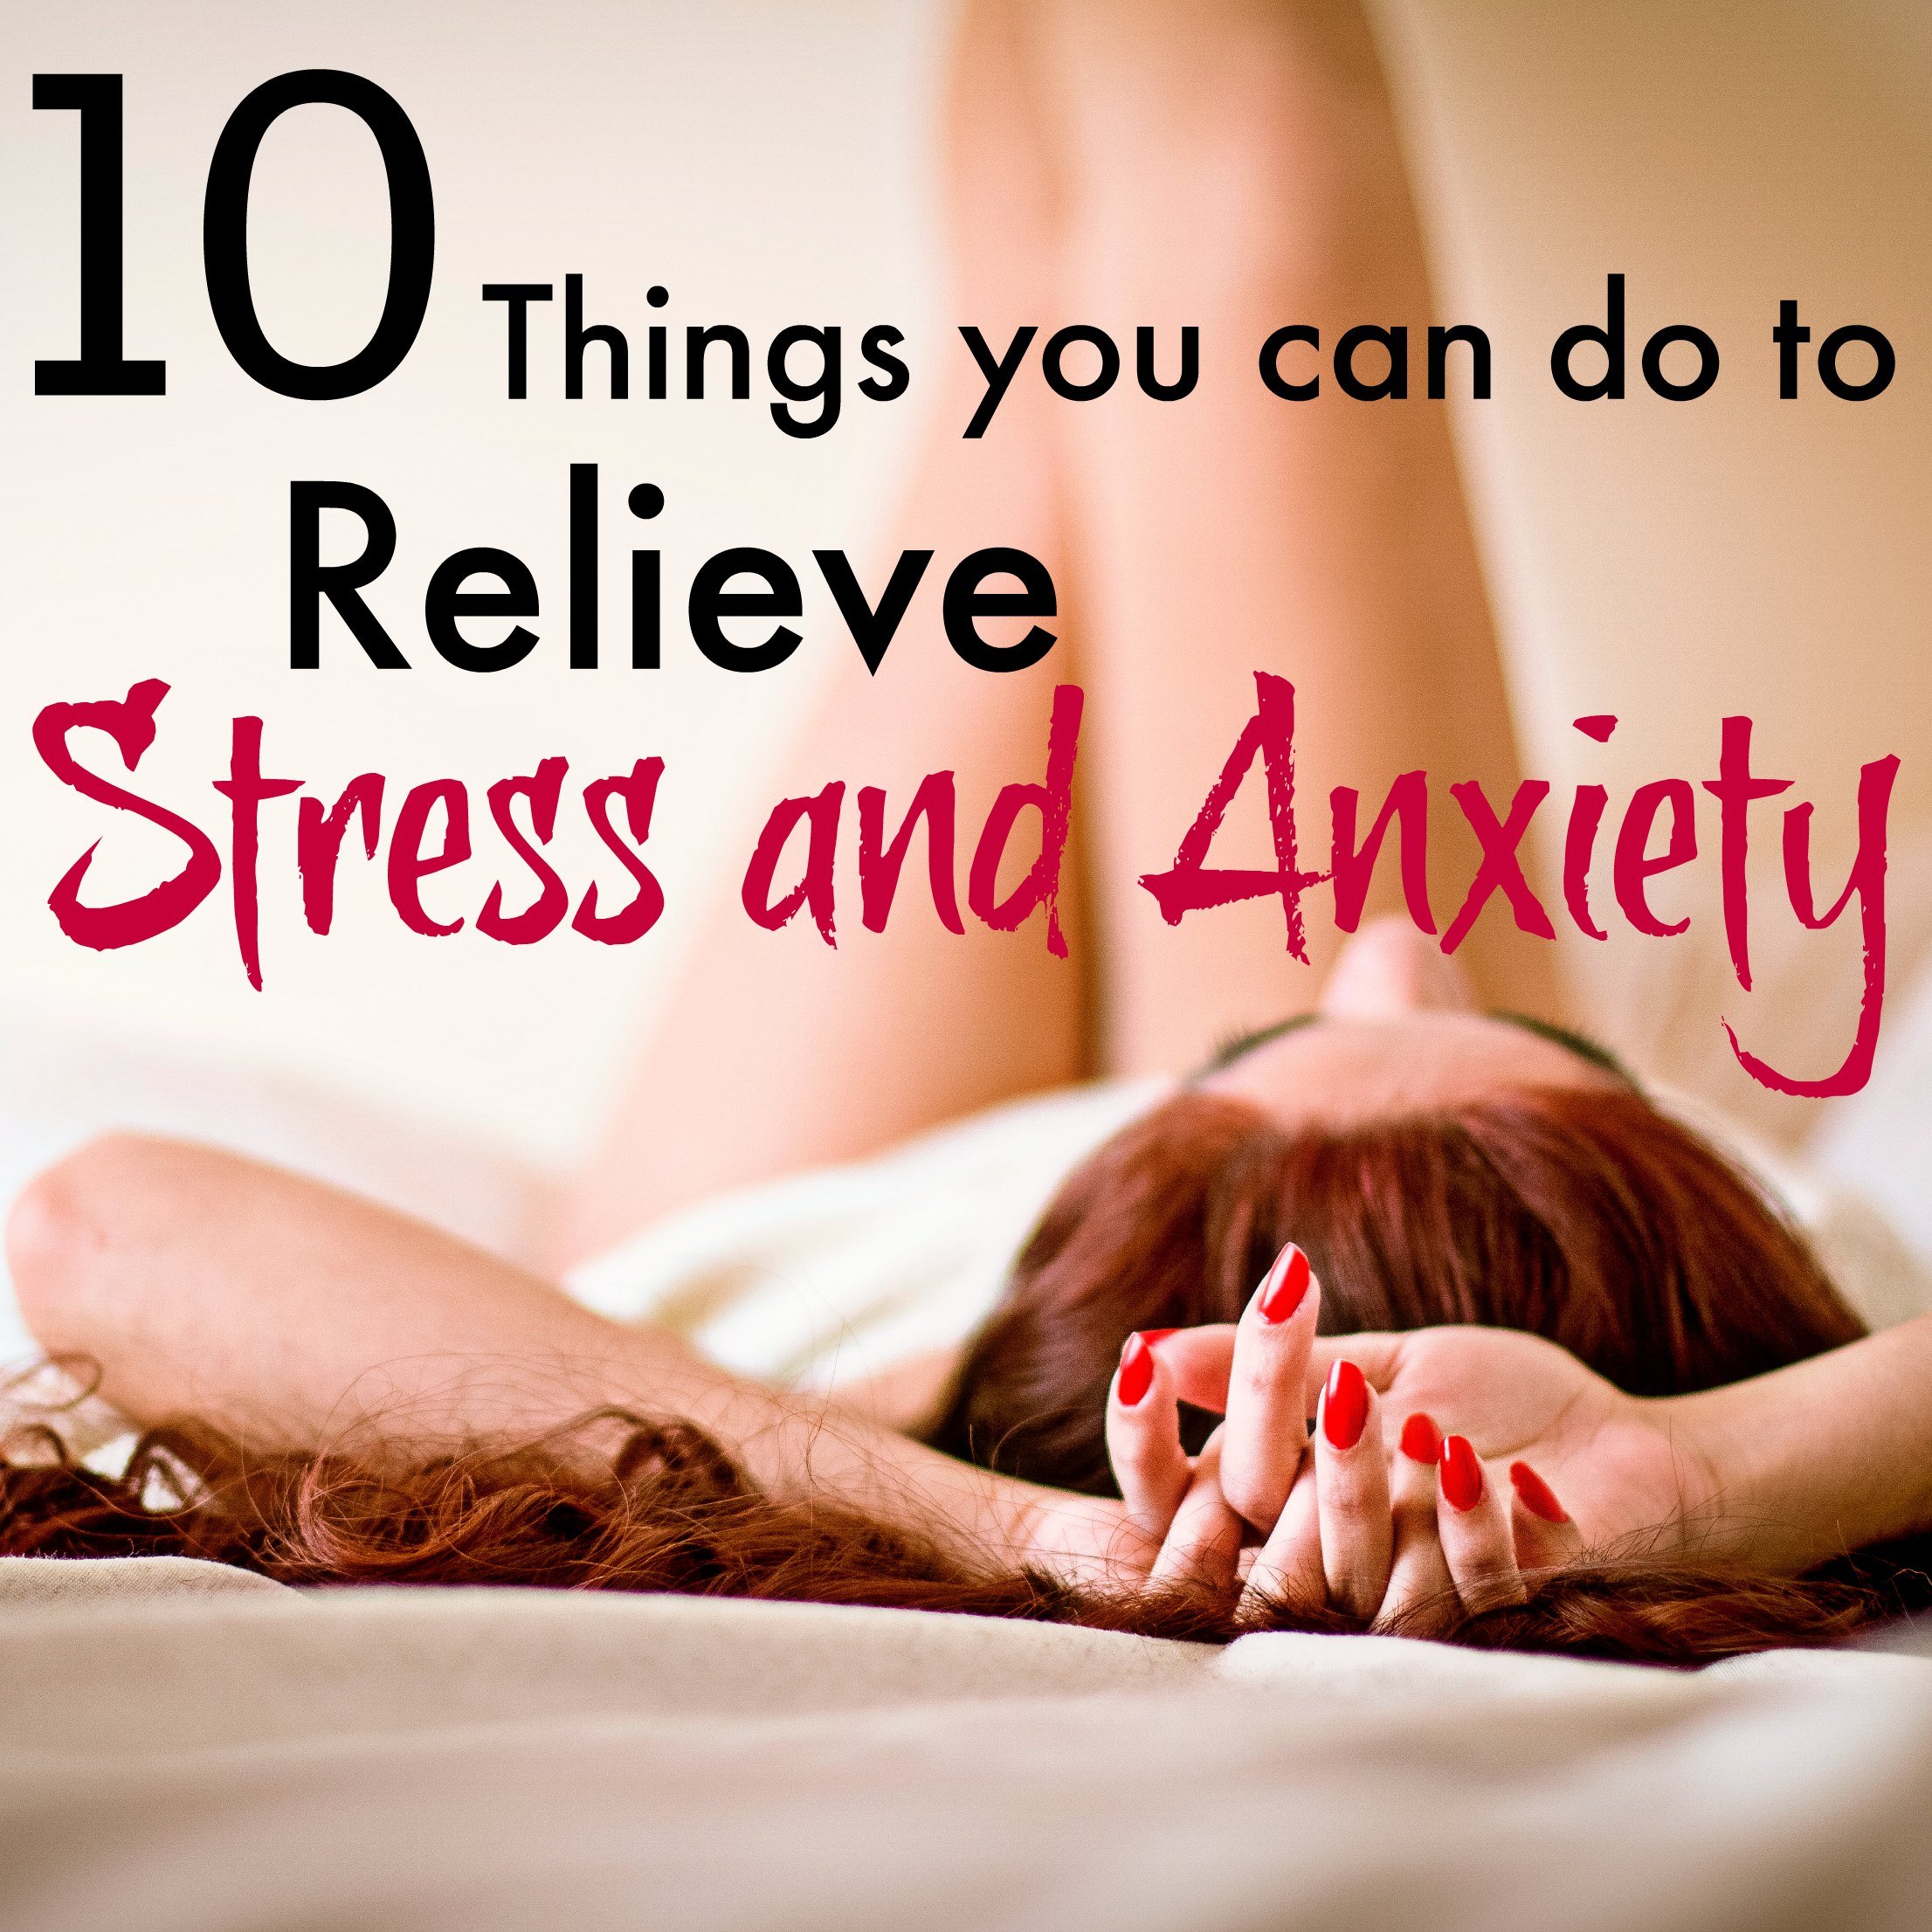 10 ways to relieve stress and anxiety